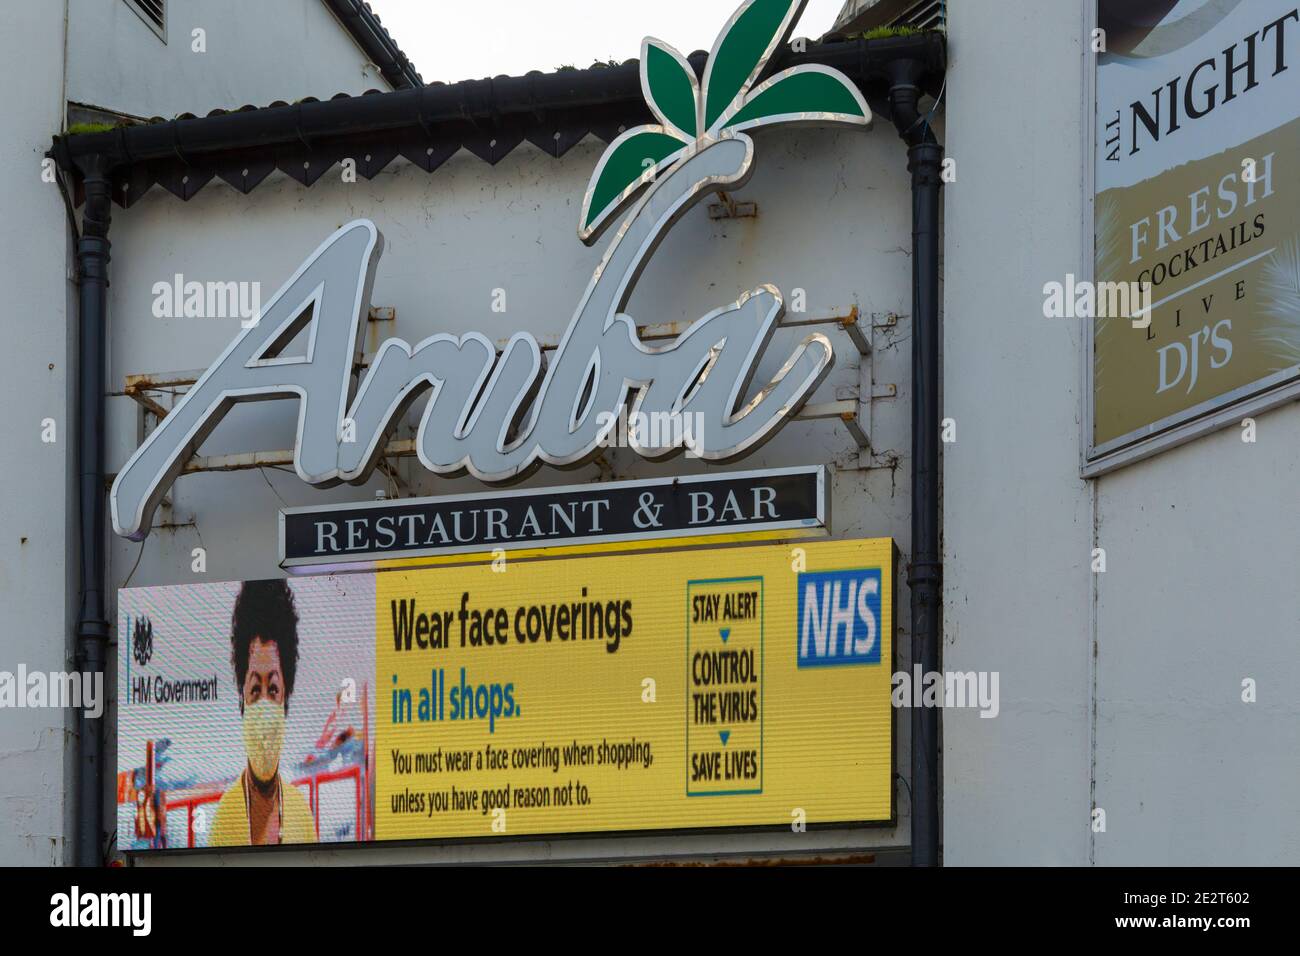 Bournemouth, Dorset UK. 15th January 2021. Signs at Pier Approach, Bournemouth reminding people to wear face coverings in all shops, stay alert, control the virus, save lives during Lockdown 3 of the Coronavirus Covid 19 pandemic.  Credit: Carolyn Jenkins/Alamy Live News Stock Photo